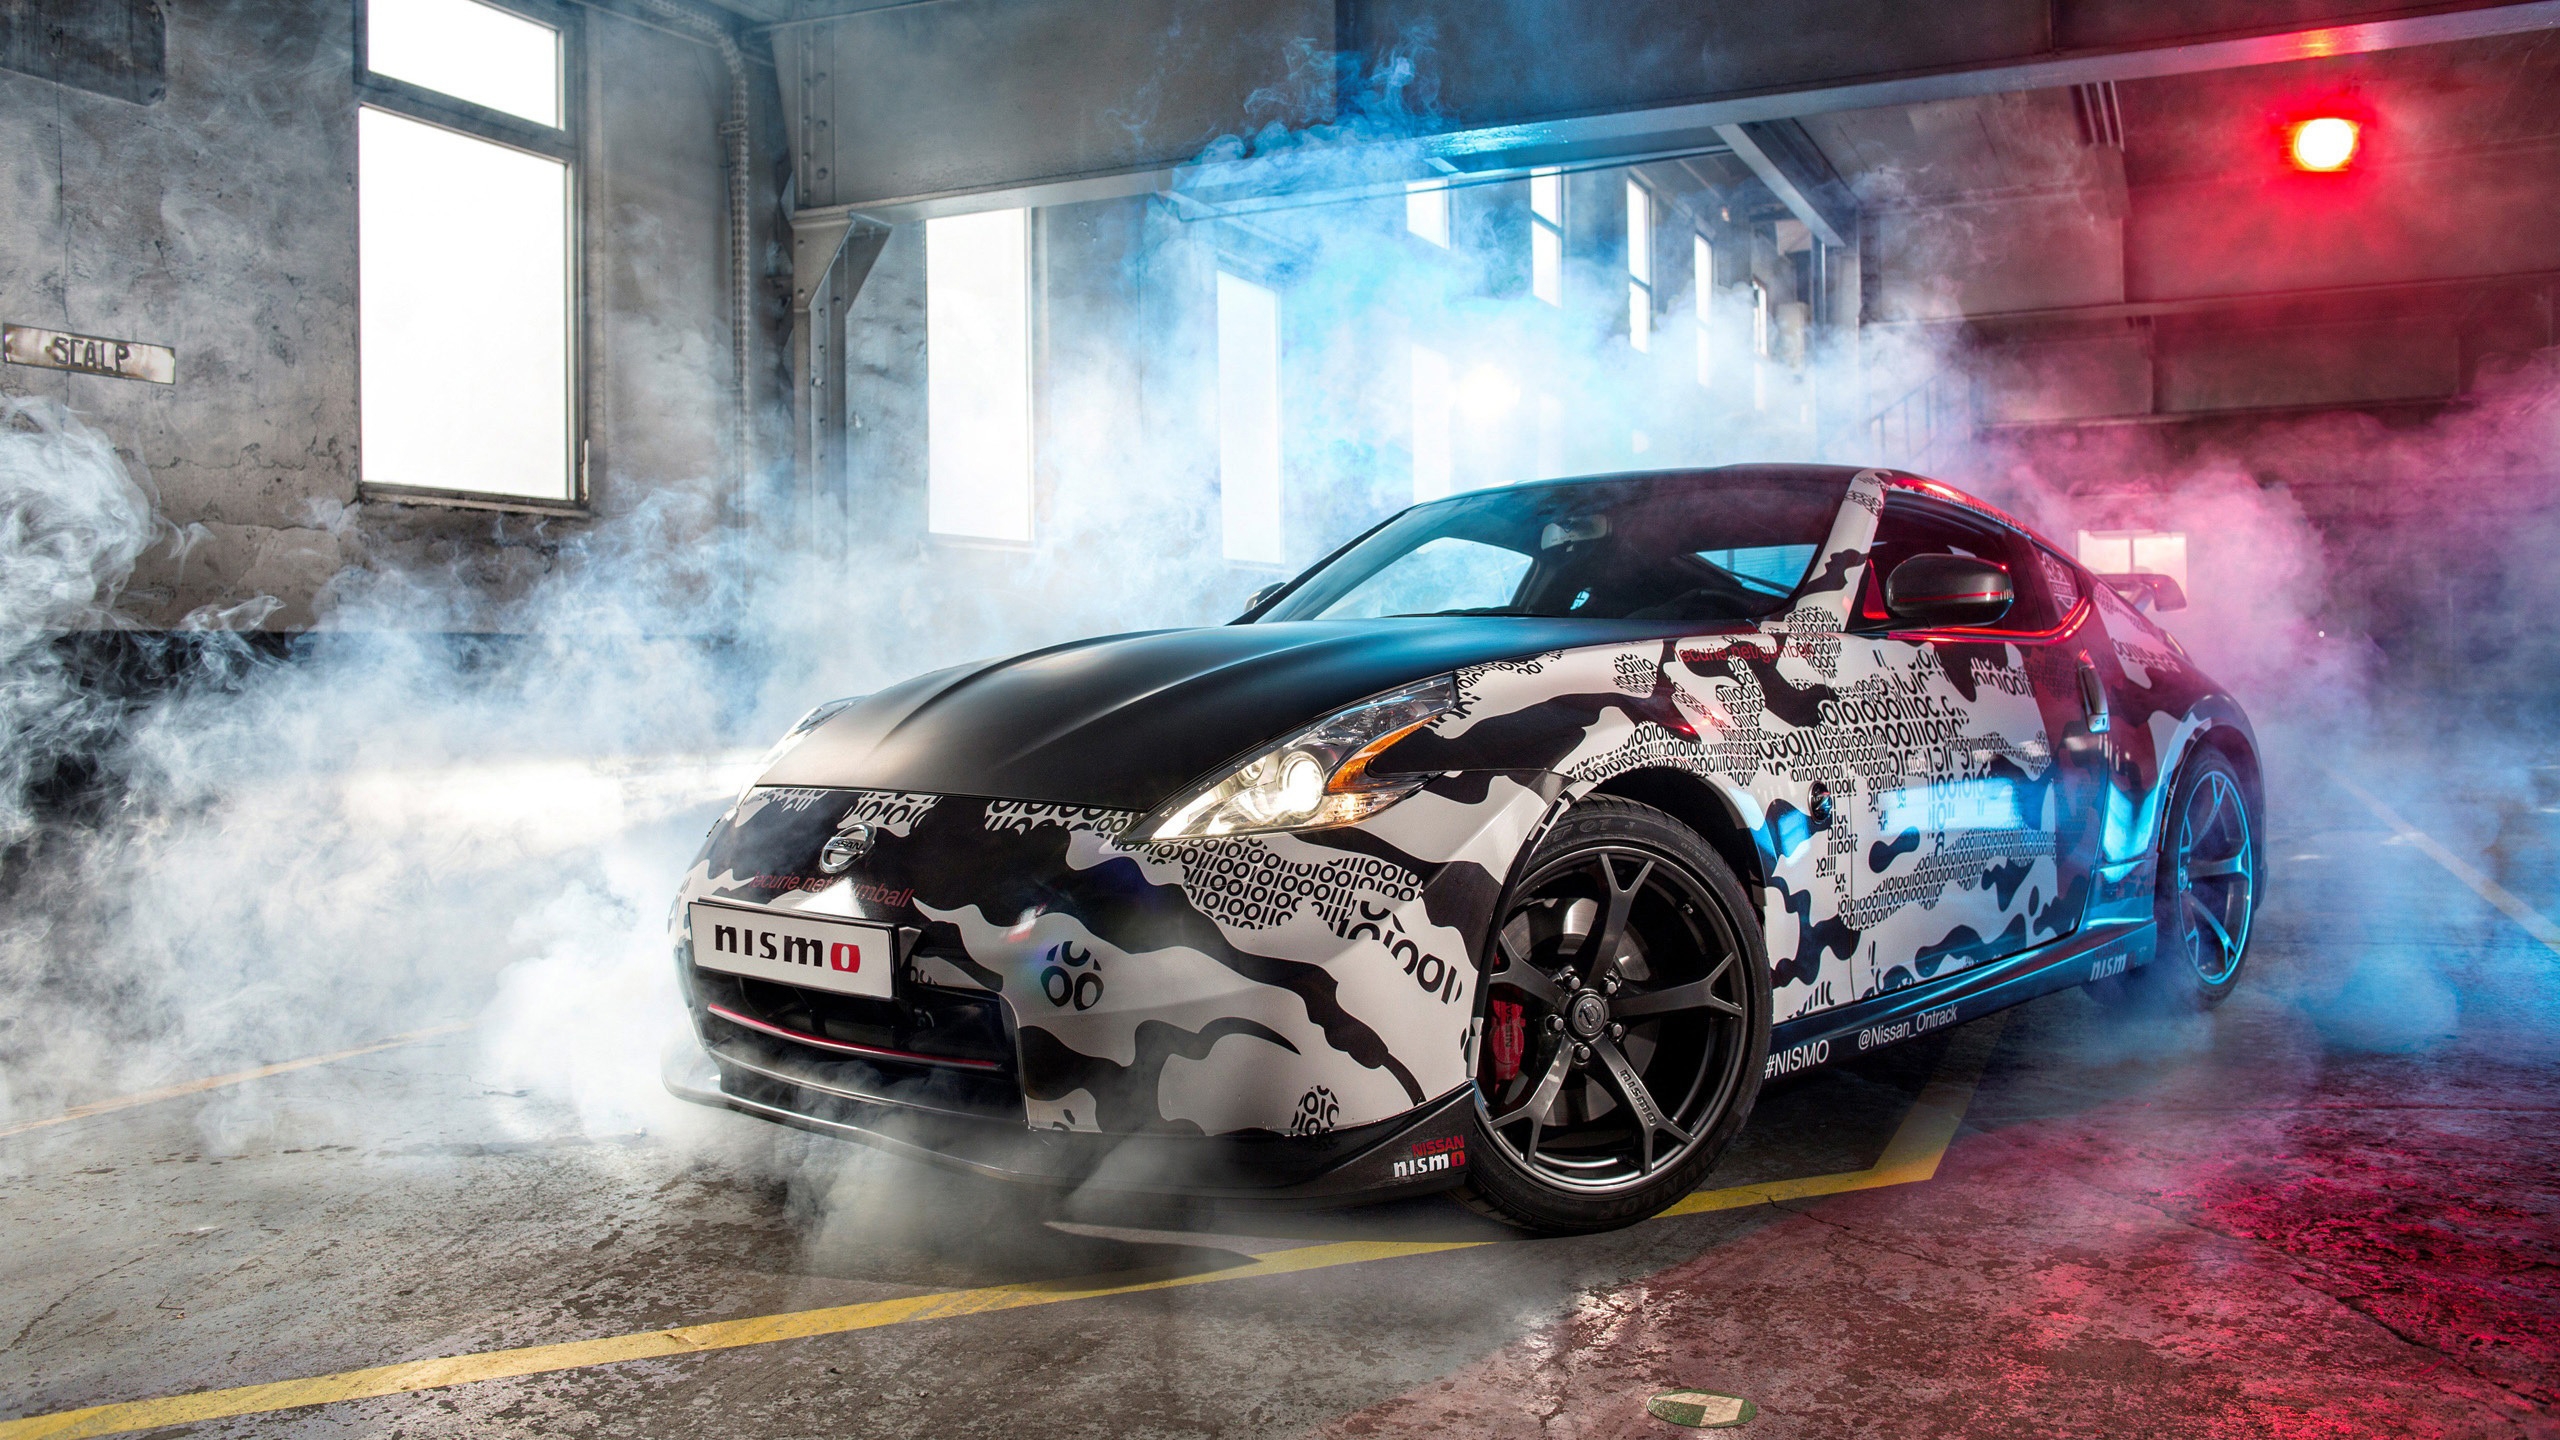 Nissan 370Z NISMO Gumball for 2560x1440 HDTV resolution